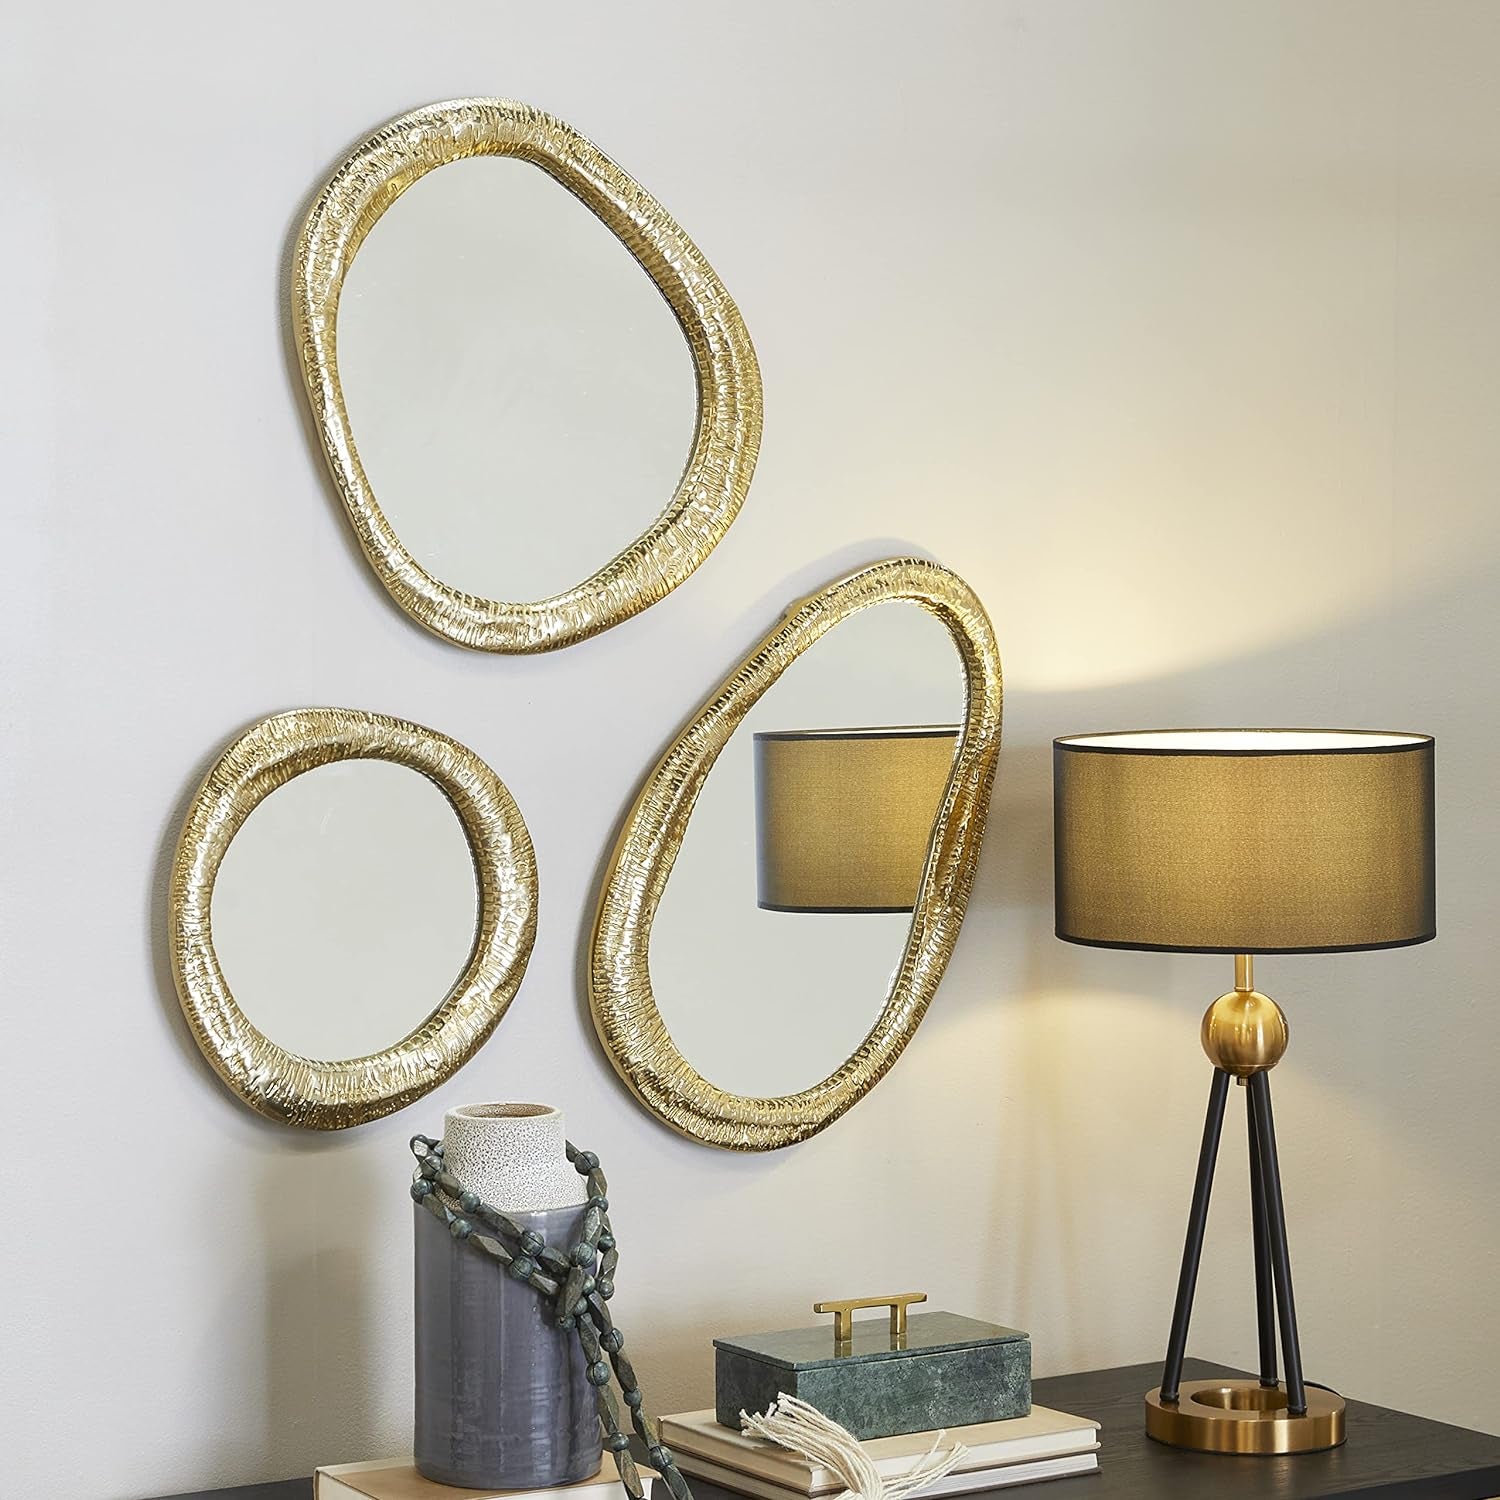 Set of 3 Aluminum Abstract Wall Mirrors in Gold, with Heights of 23, 19, and 15